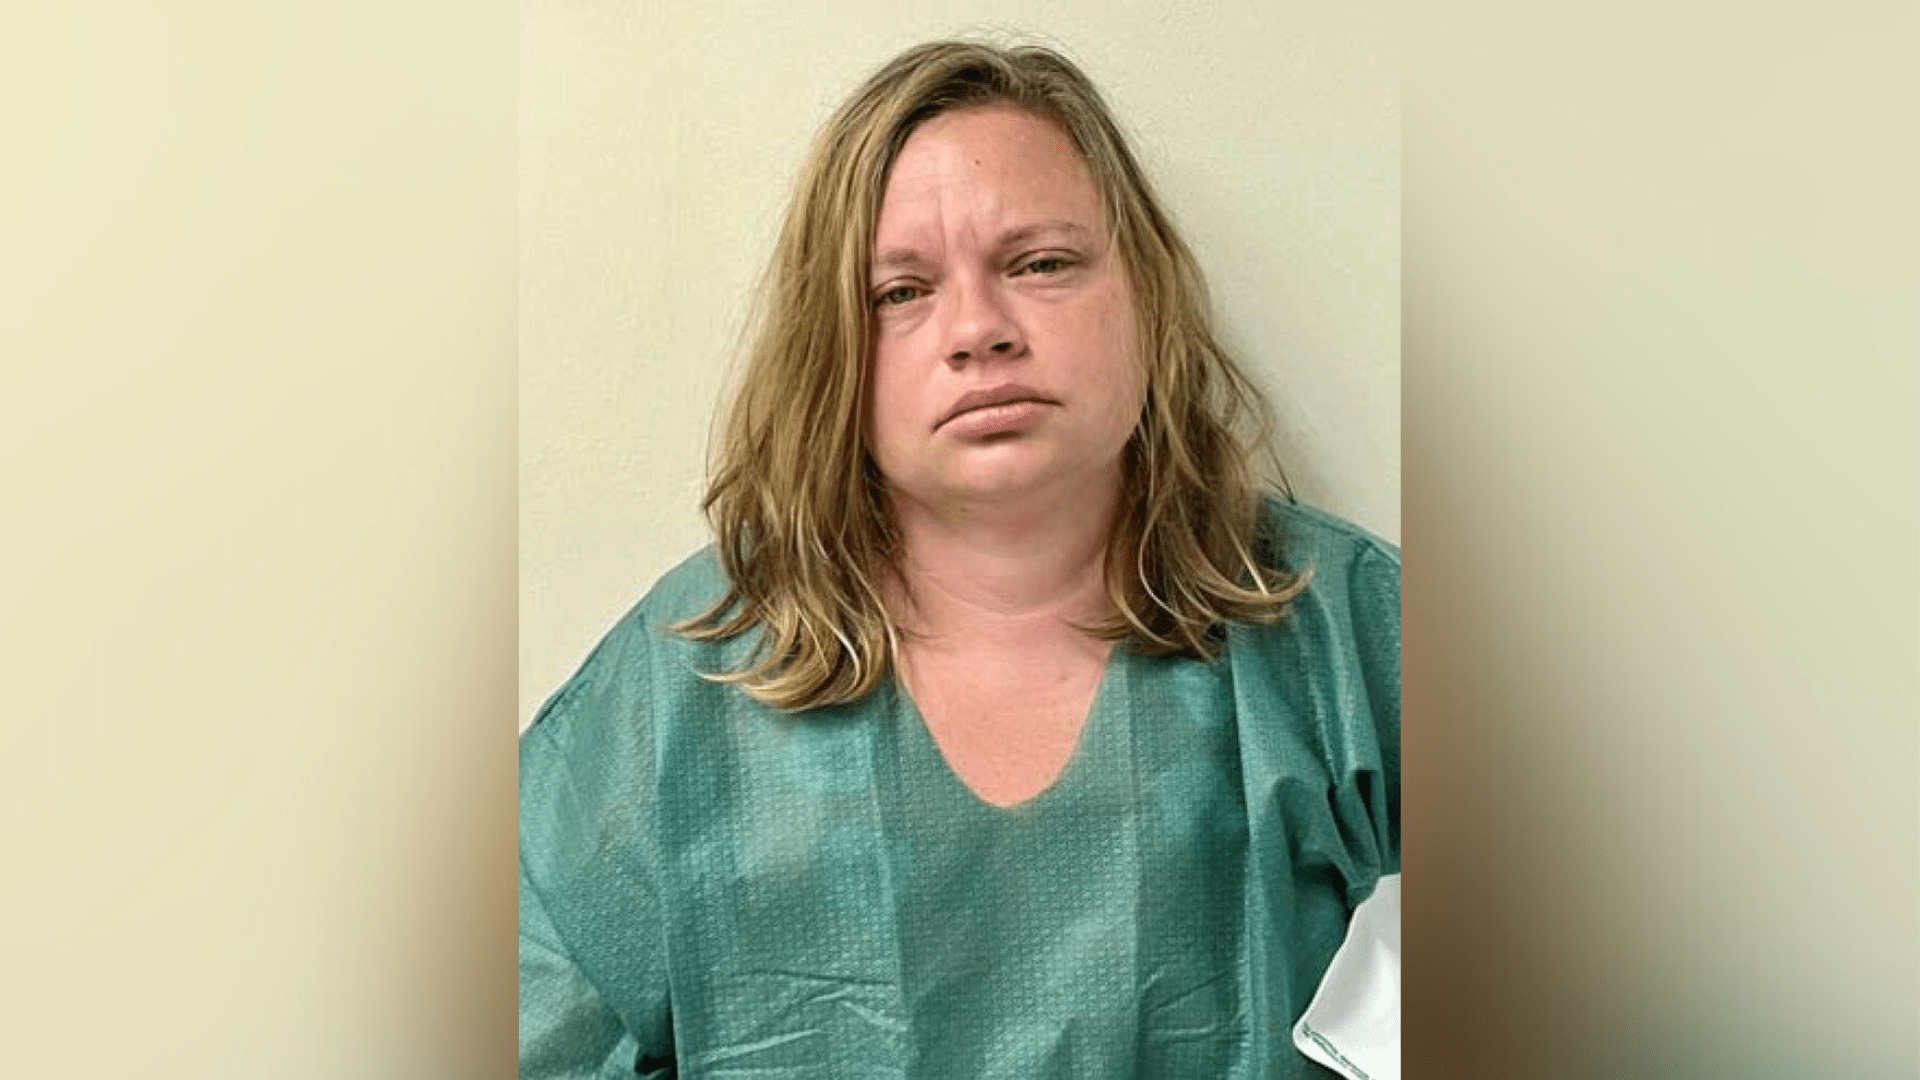 Mississippi mother charged with murder after her 2-year-old child drowned